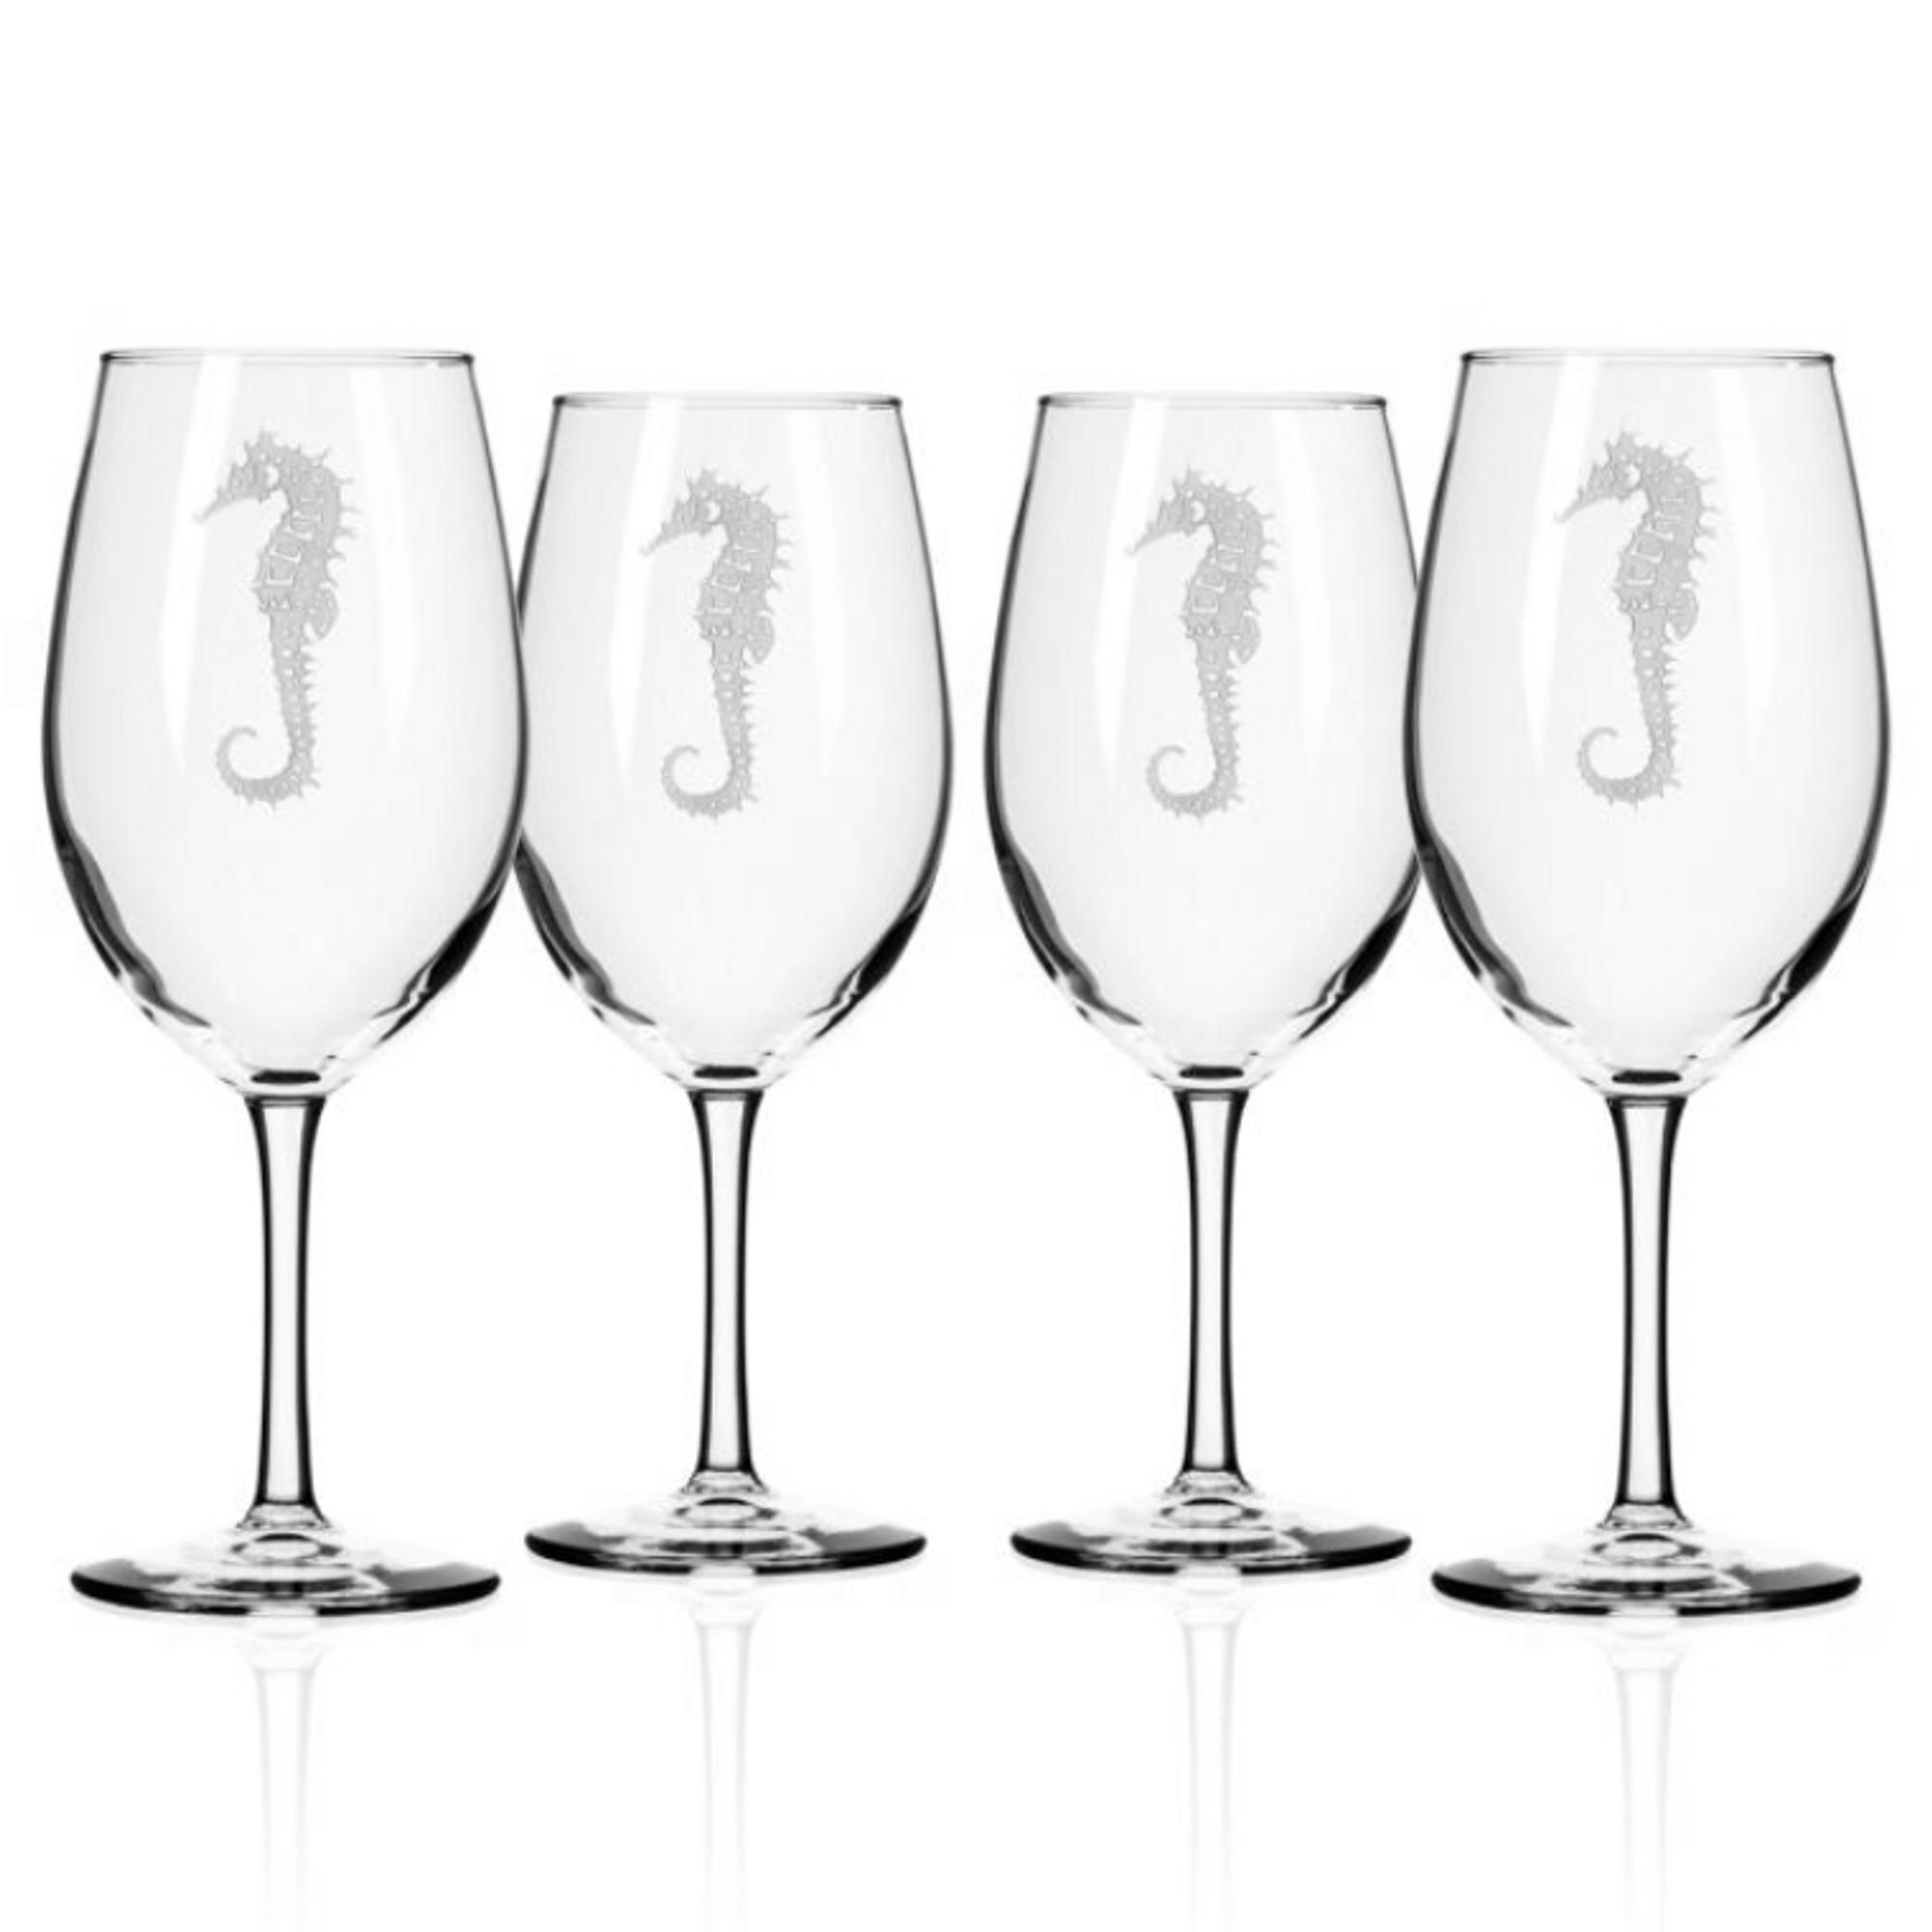 Sea Shell Group Stemless Wine Glass Set of Four